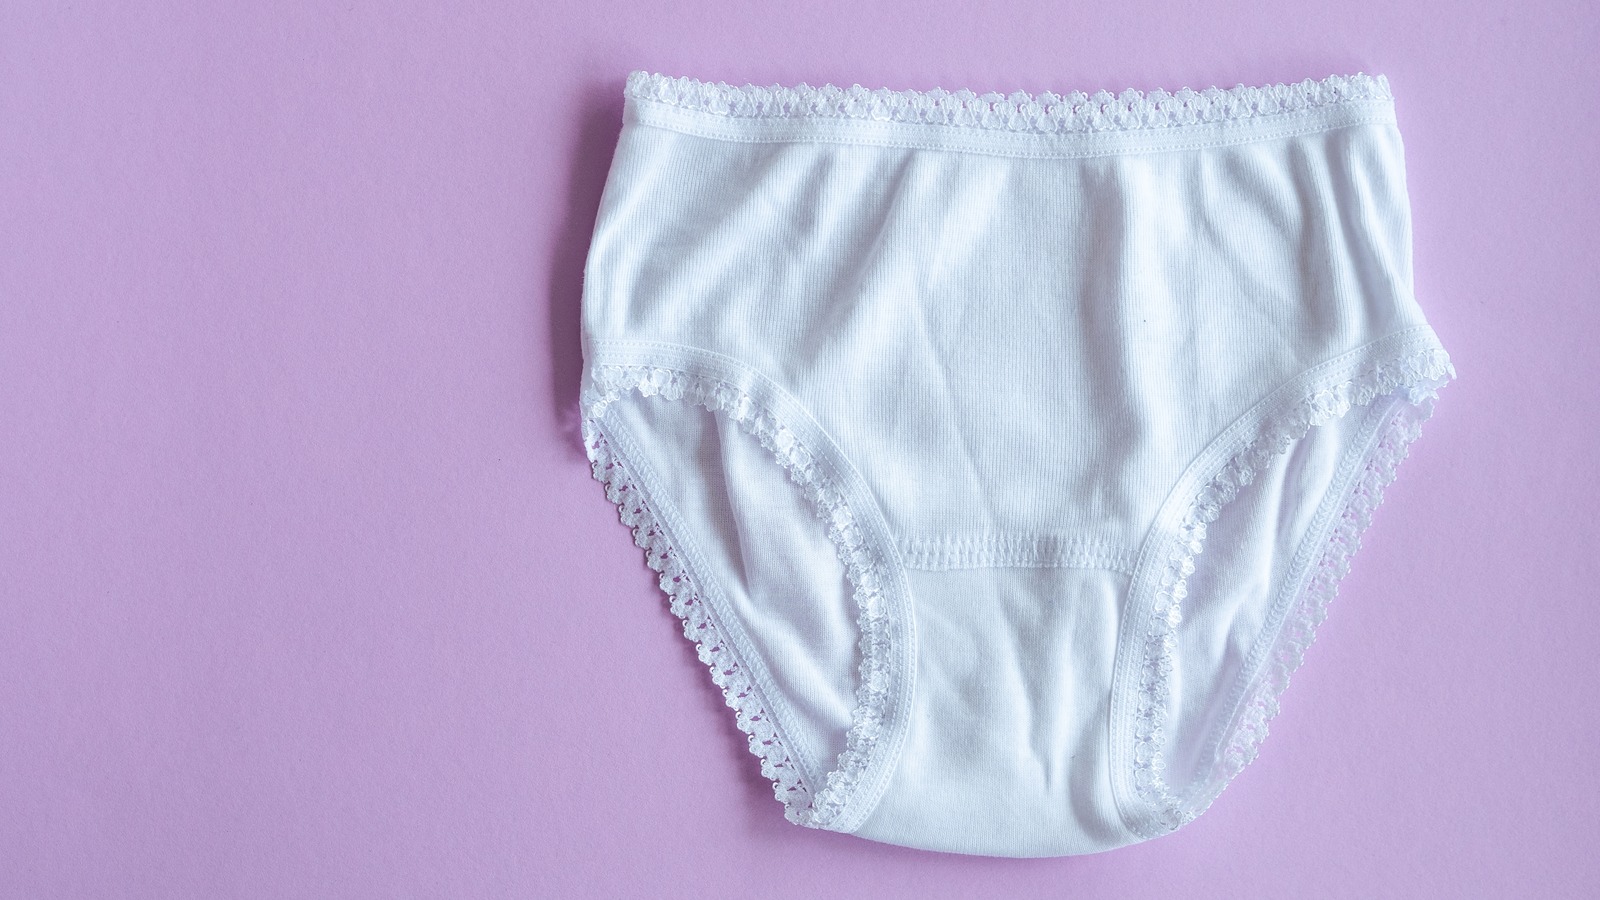 Can You Be Allergic To Your Underwear?